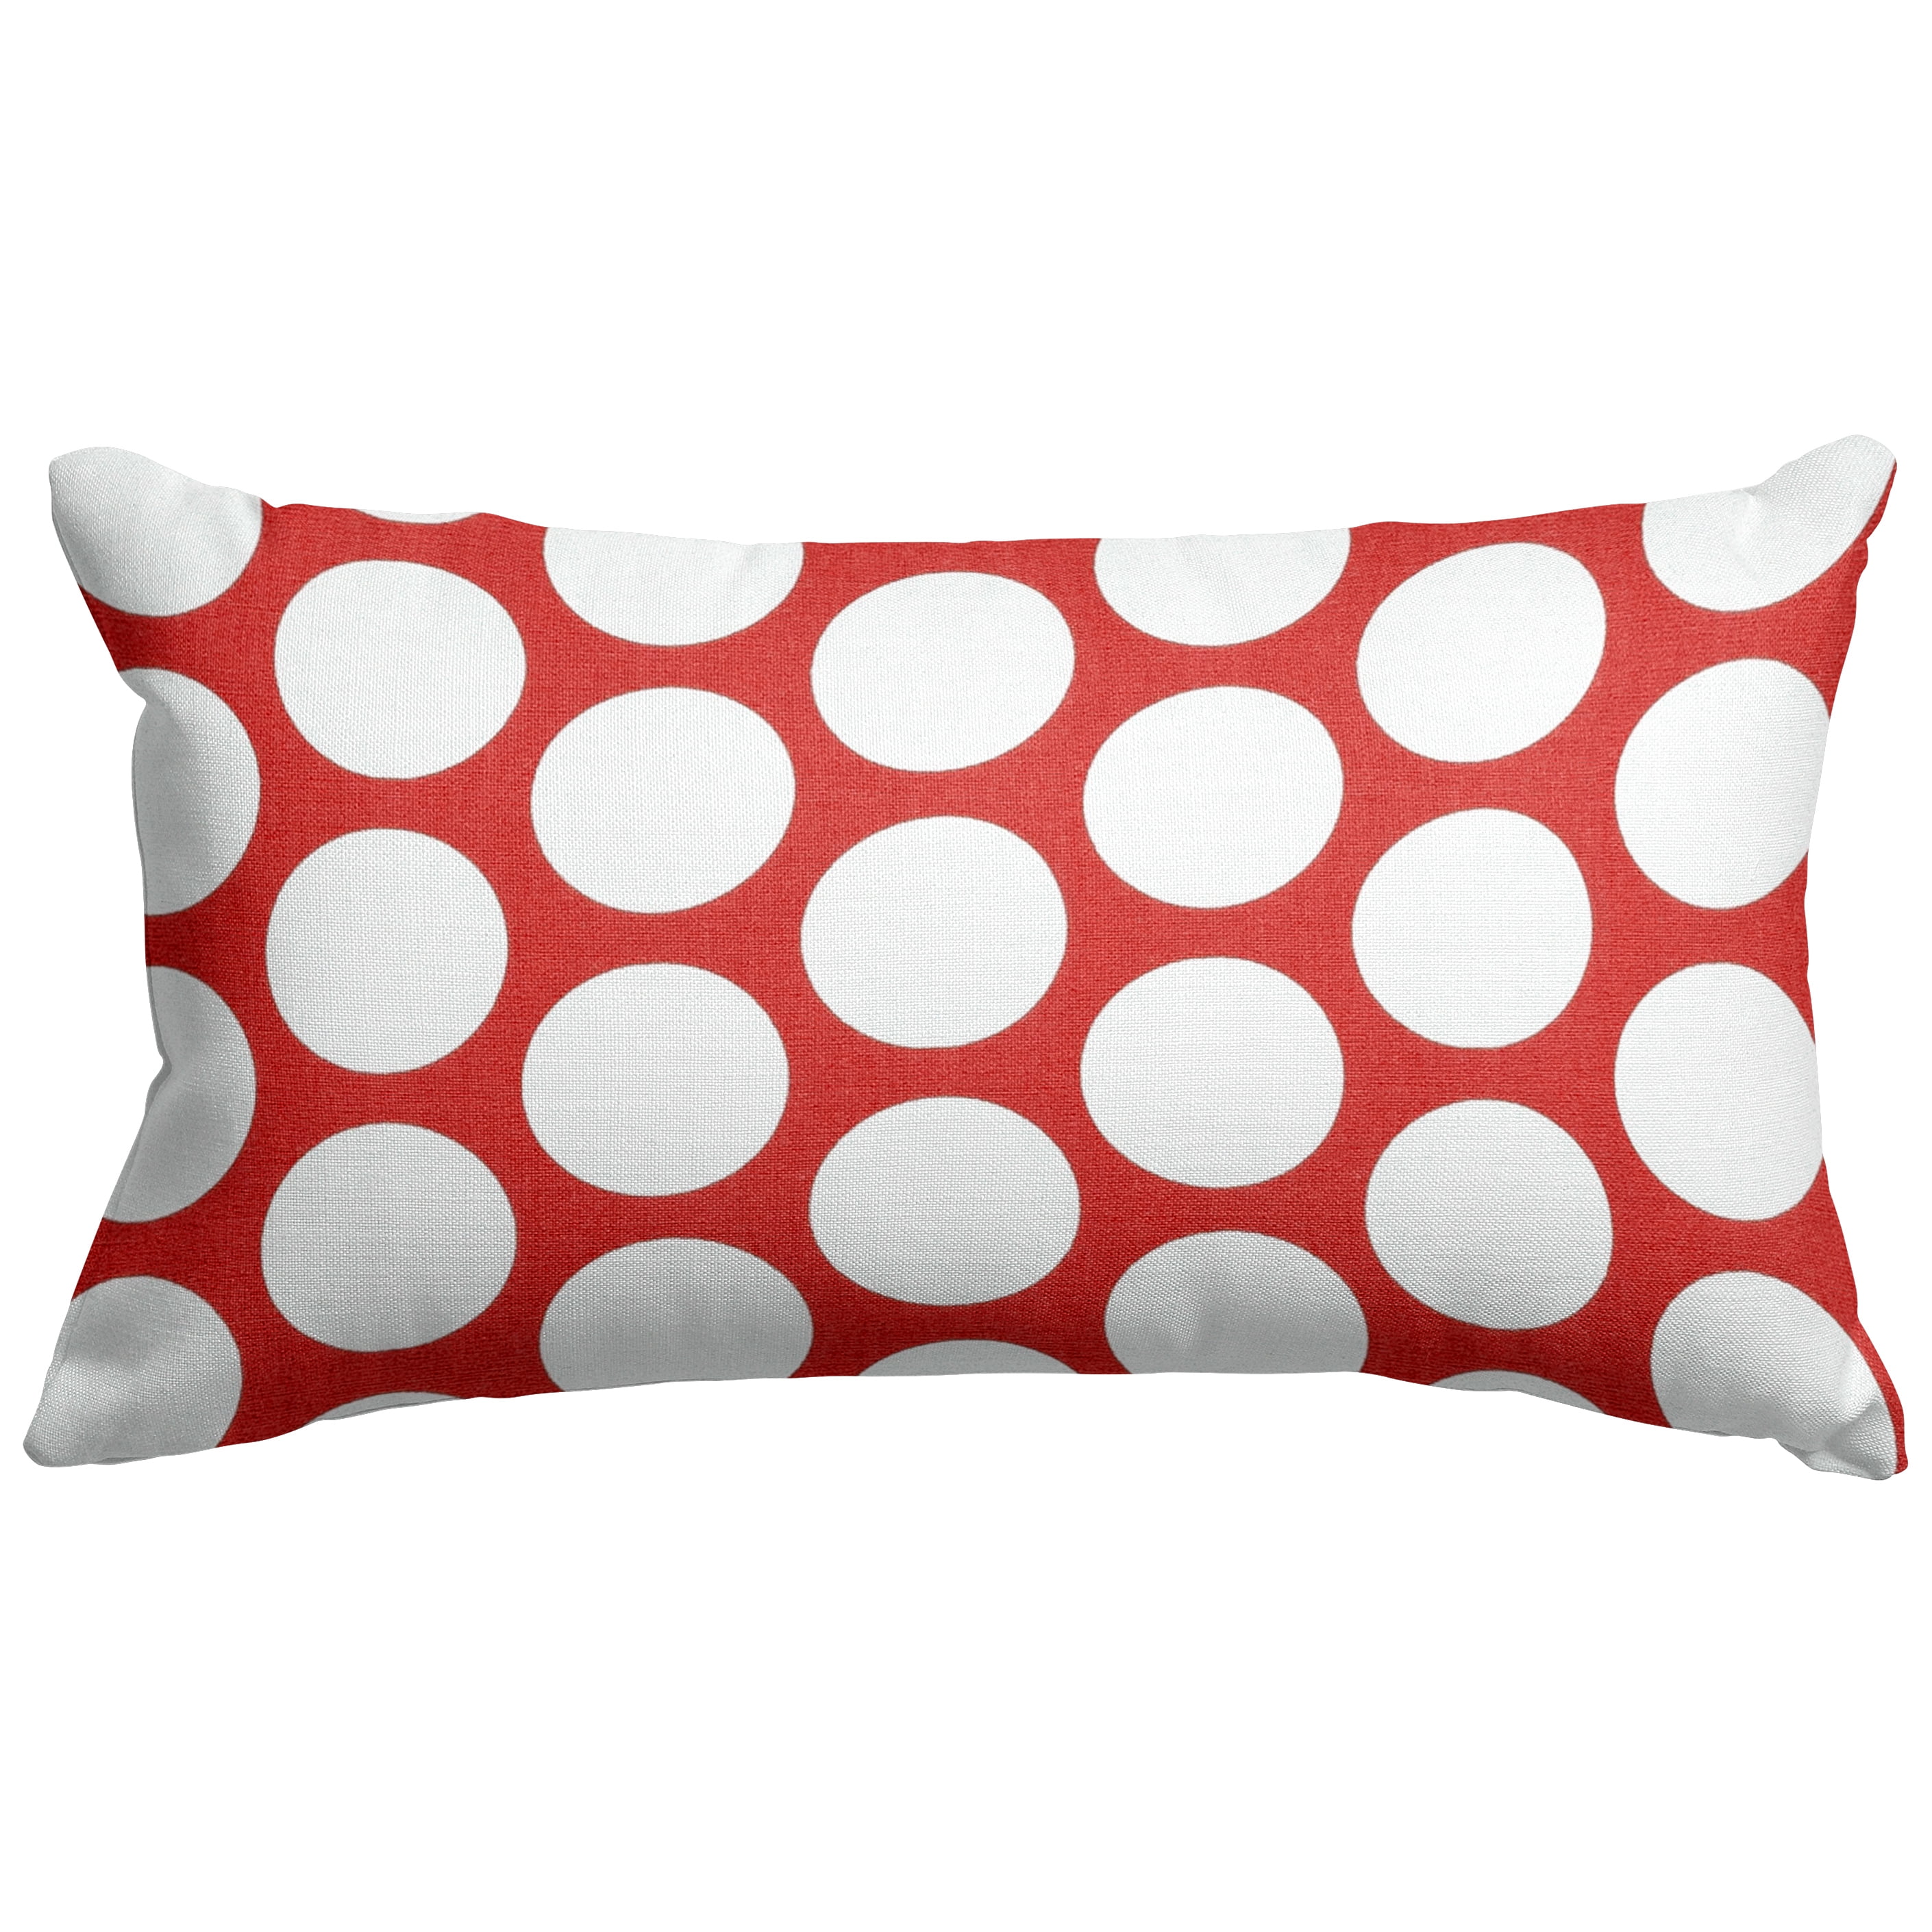 Majestic Home Goods Large Polka Dot Indoor Small Decorative Throw ...